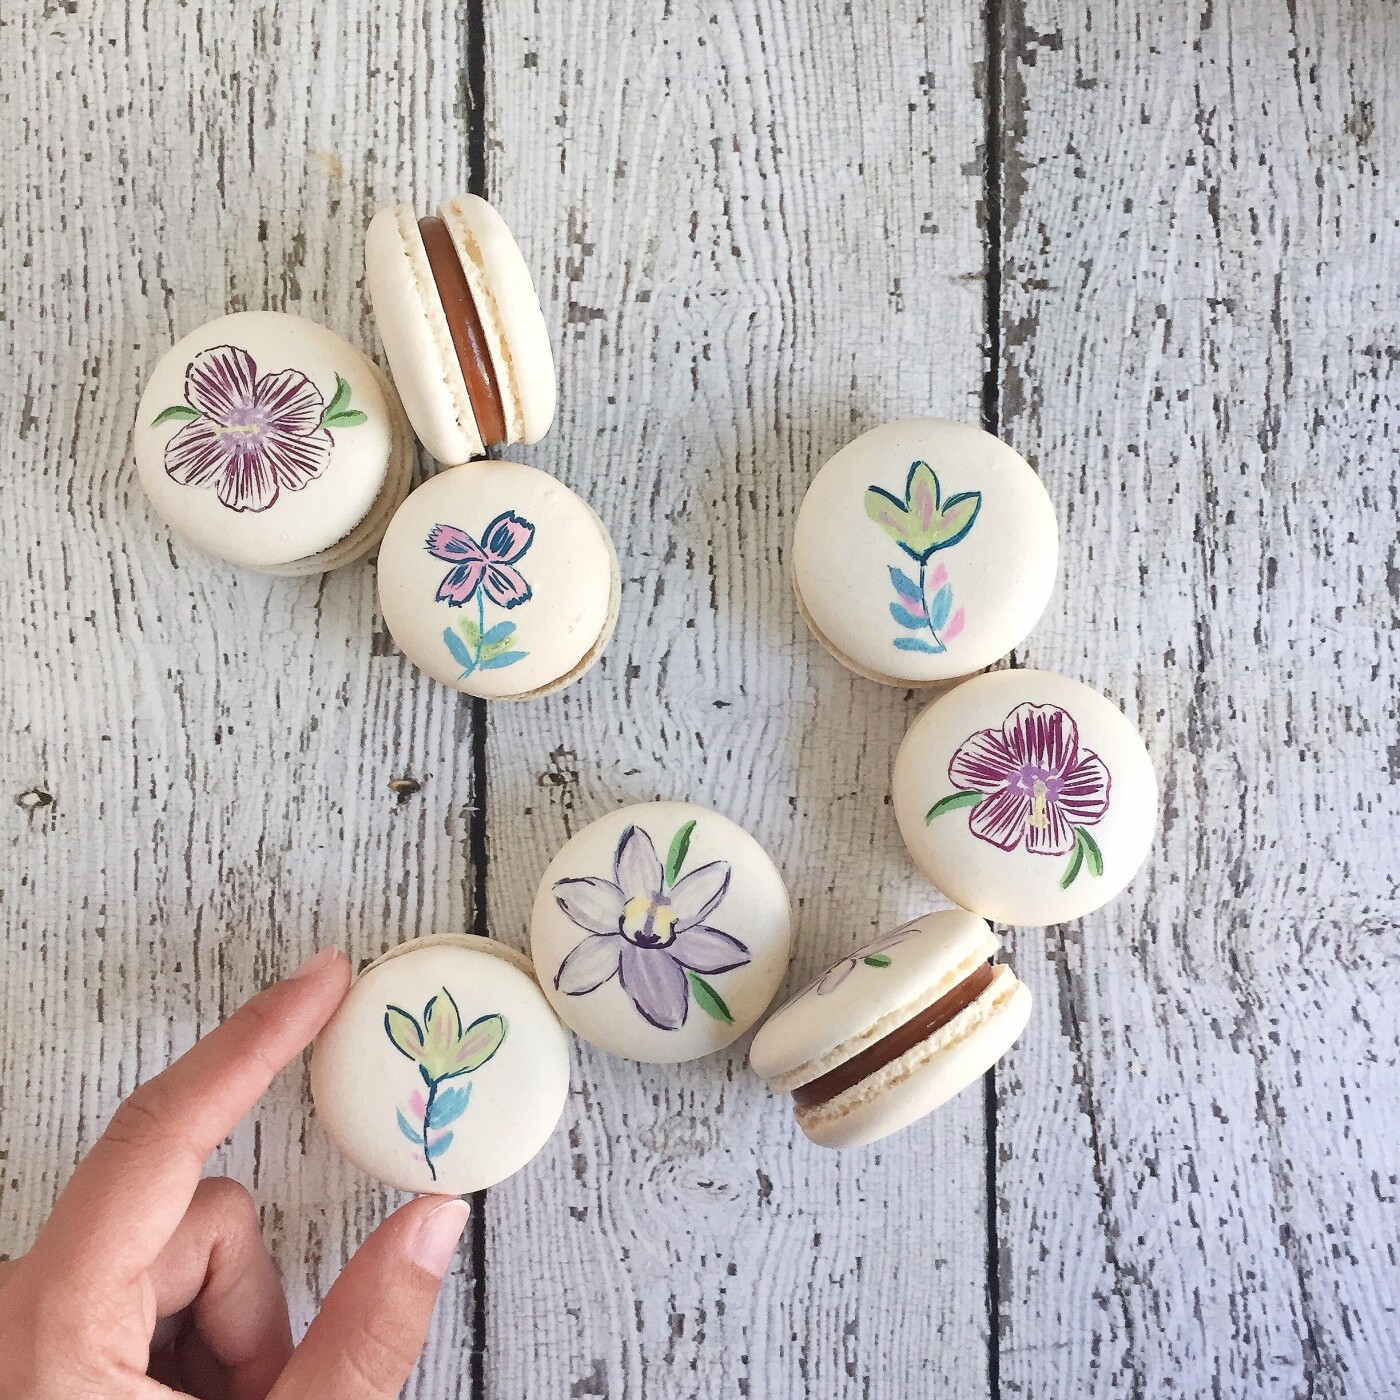 Hand painted macarons for a client. The painted flowers are also the flowers featured in some of the clients products like candles tins and mugs.